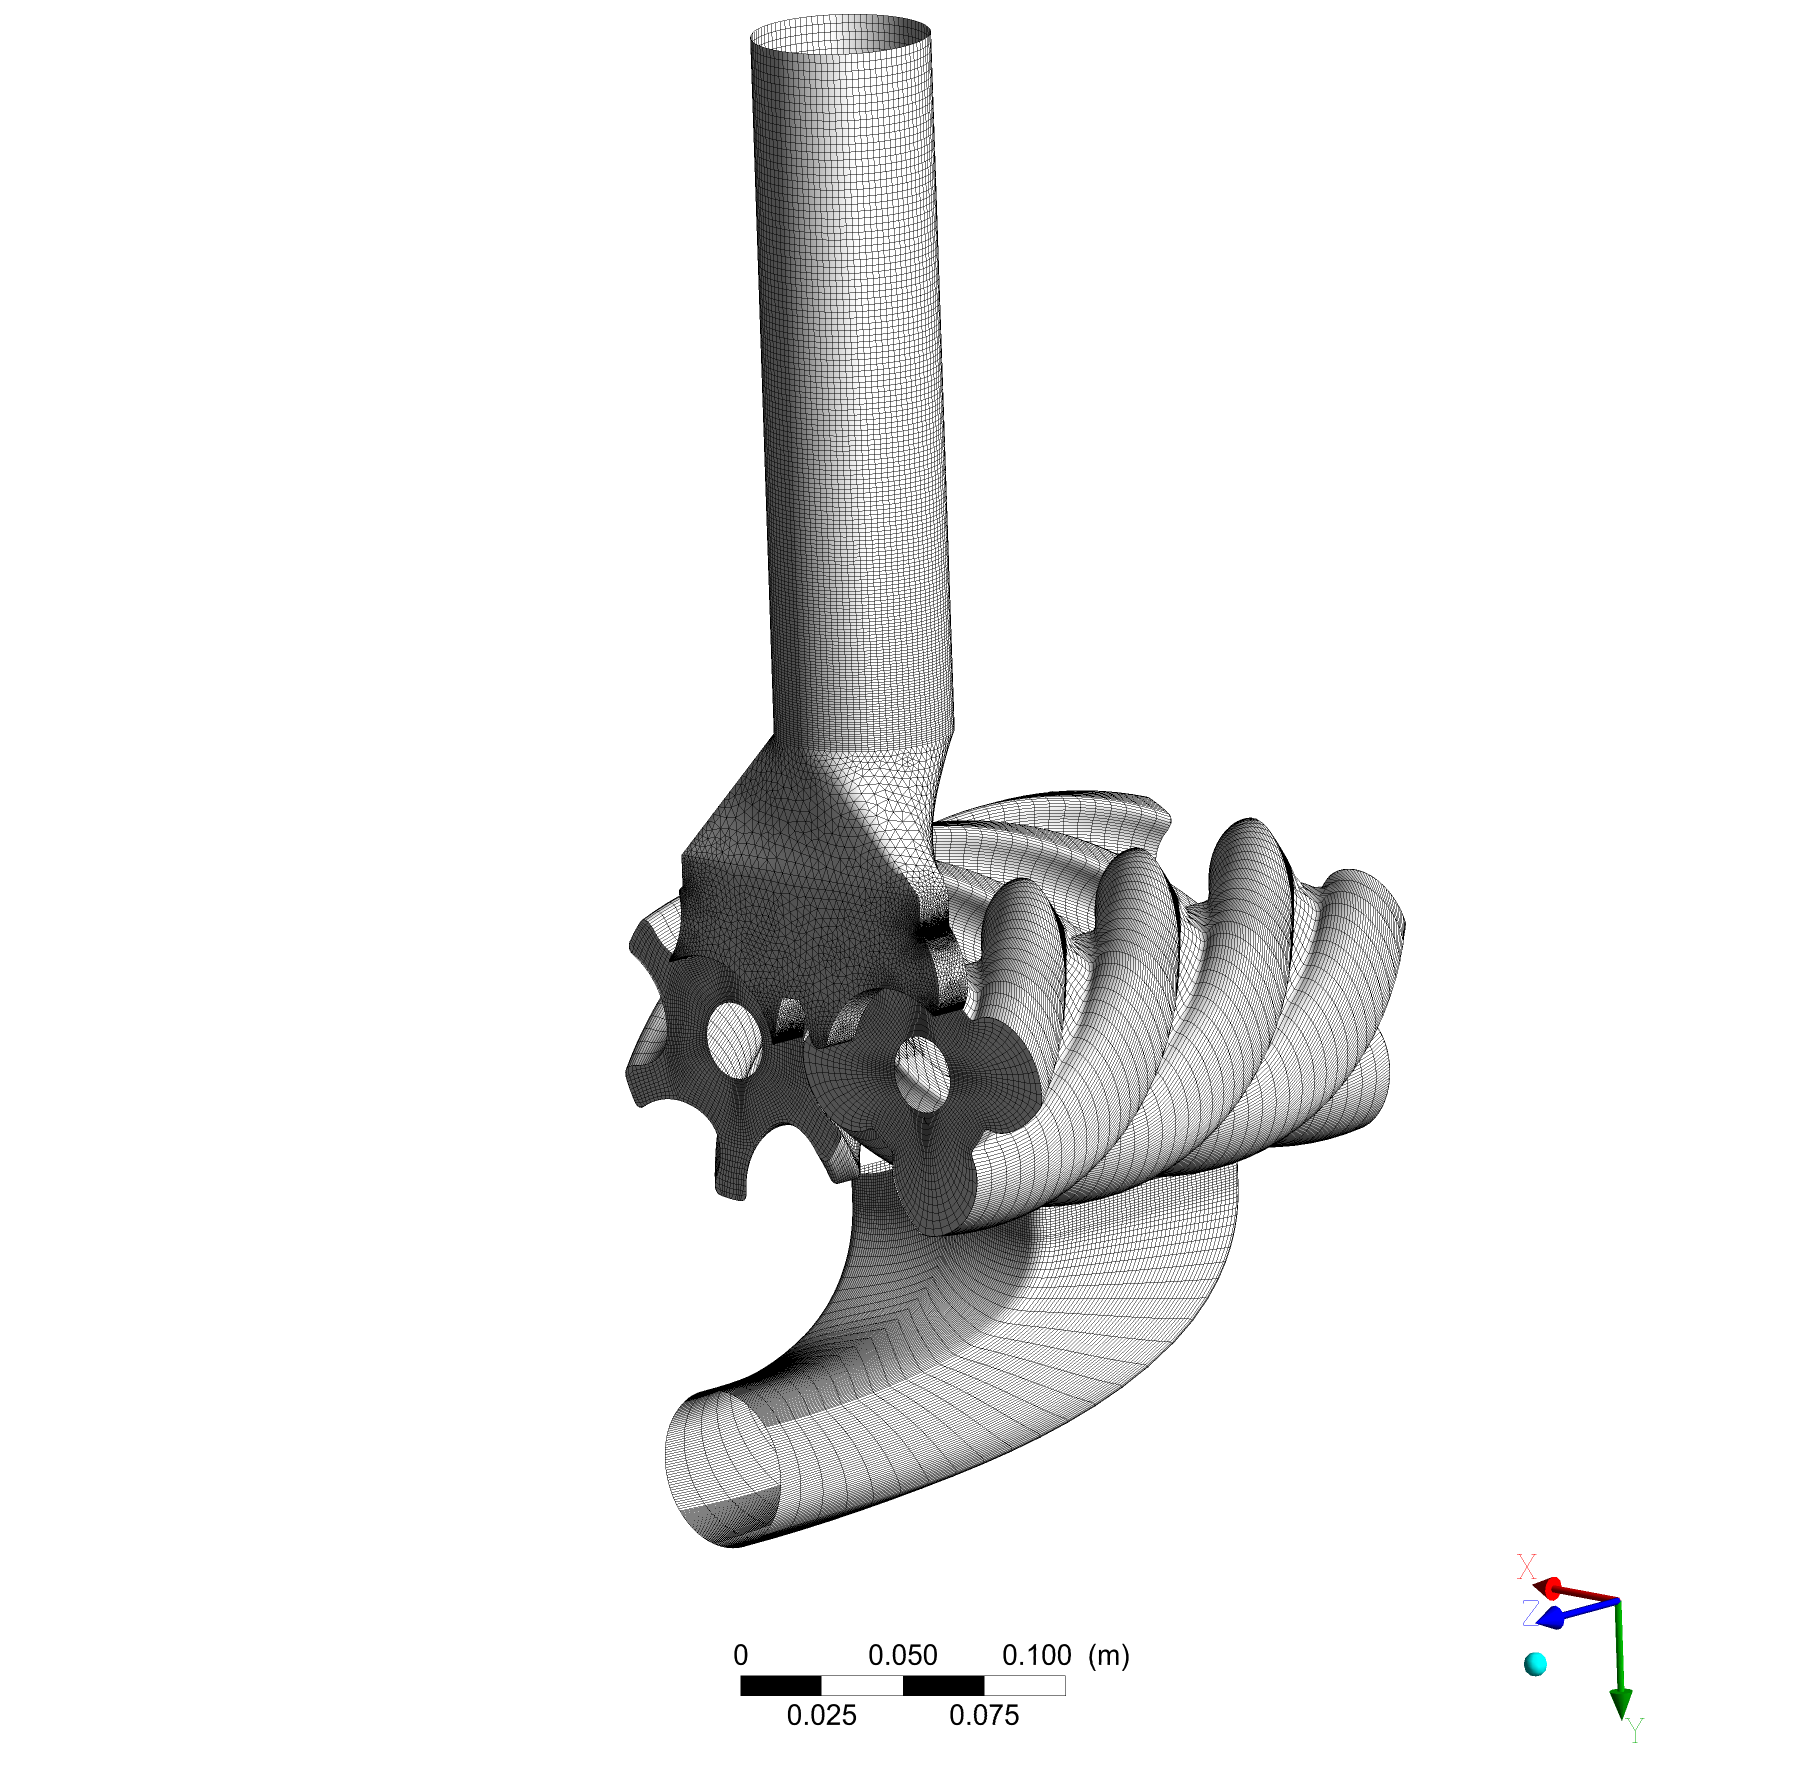 Stator and Rotor Mesh for CFD Analysis of a Screw Compressor